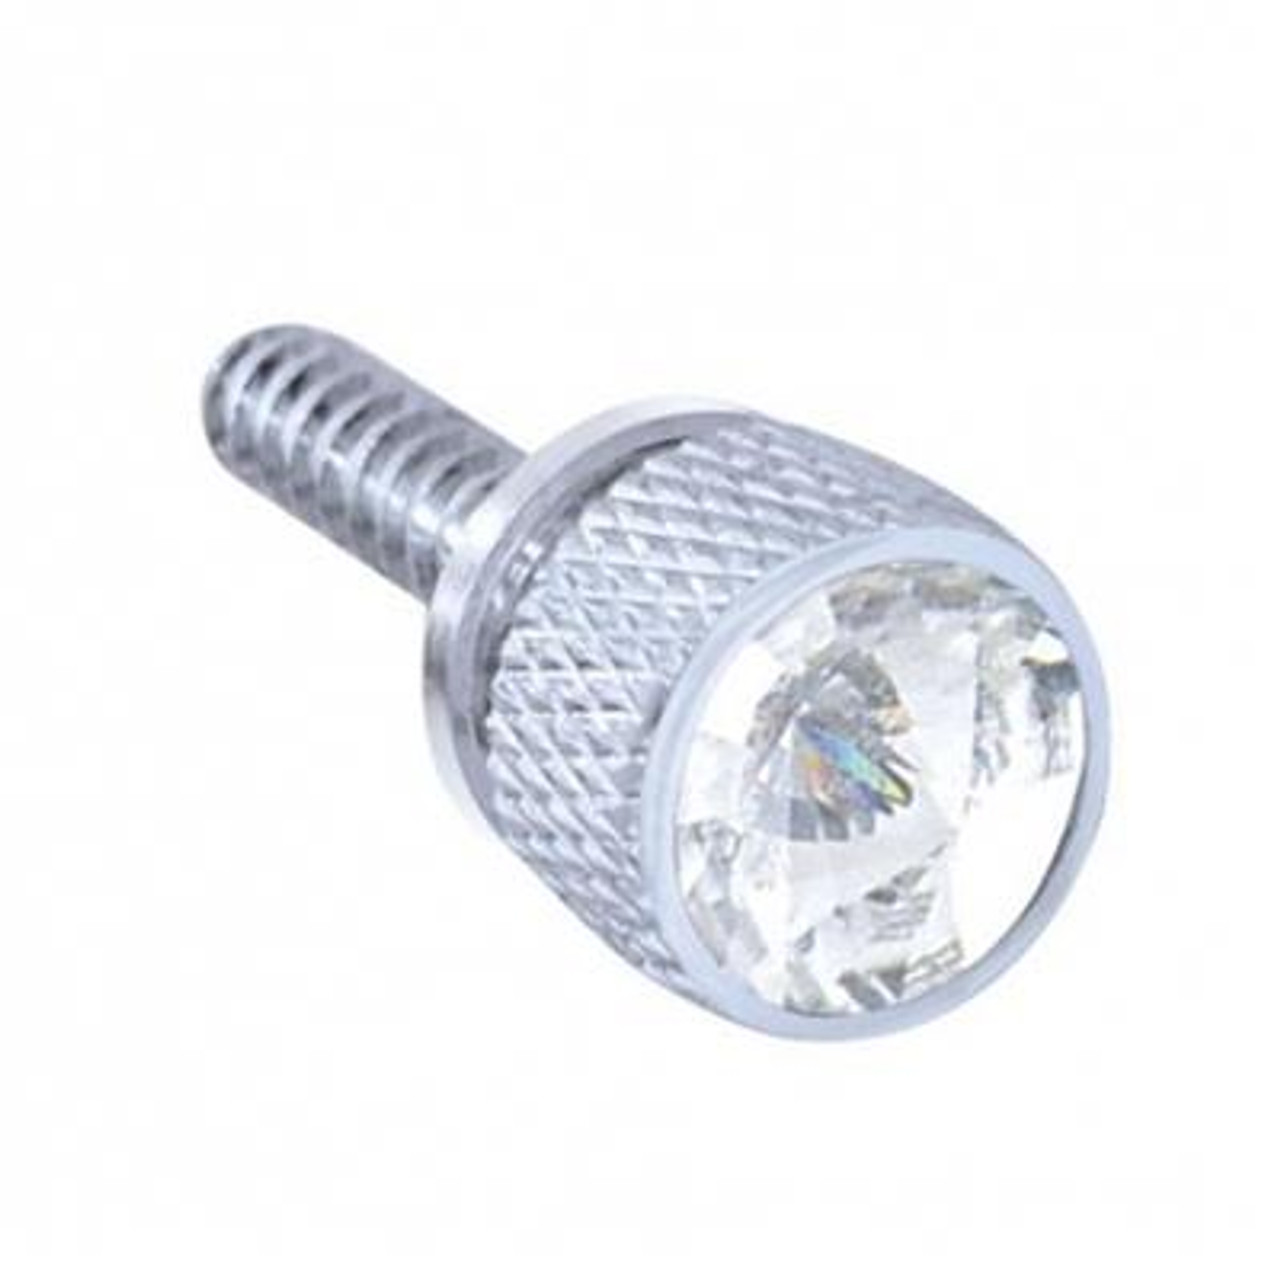 Beautiful chrome plated finish with triple chrome plating process.
Chrome dash screws with crystal for first generation body style Freightliner Cascadia.
High quality exquisite European crystal.
Available with clear crystal.